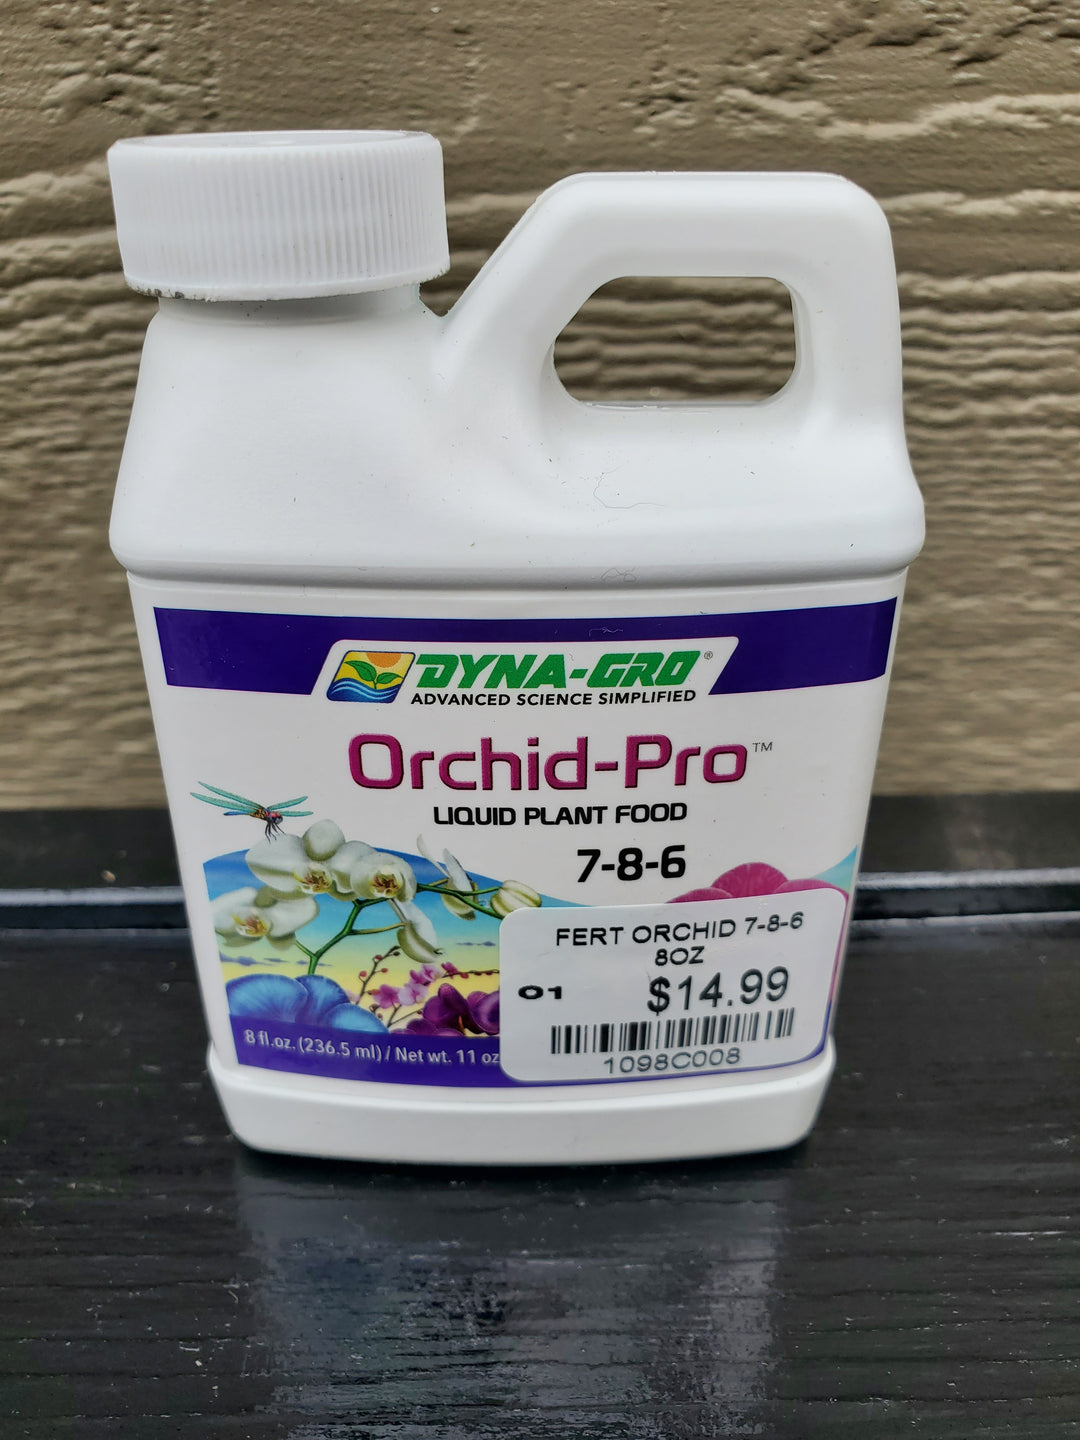 Dyna-Gro Orchid-Pro 7-8-6